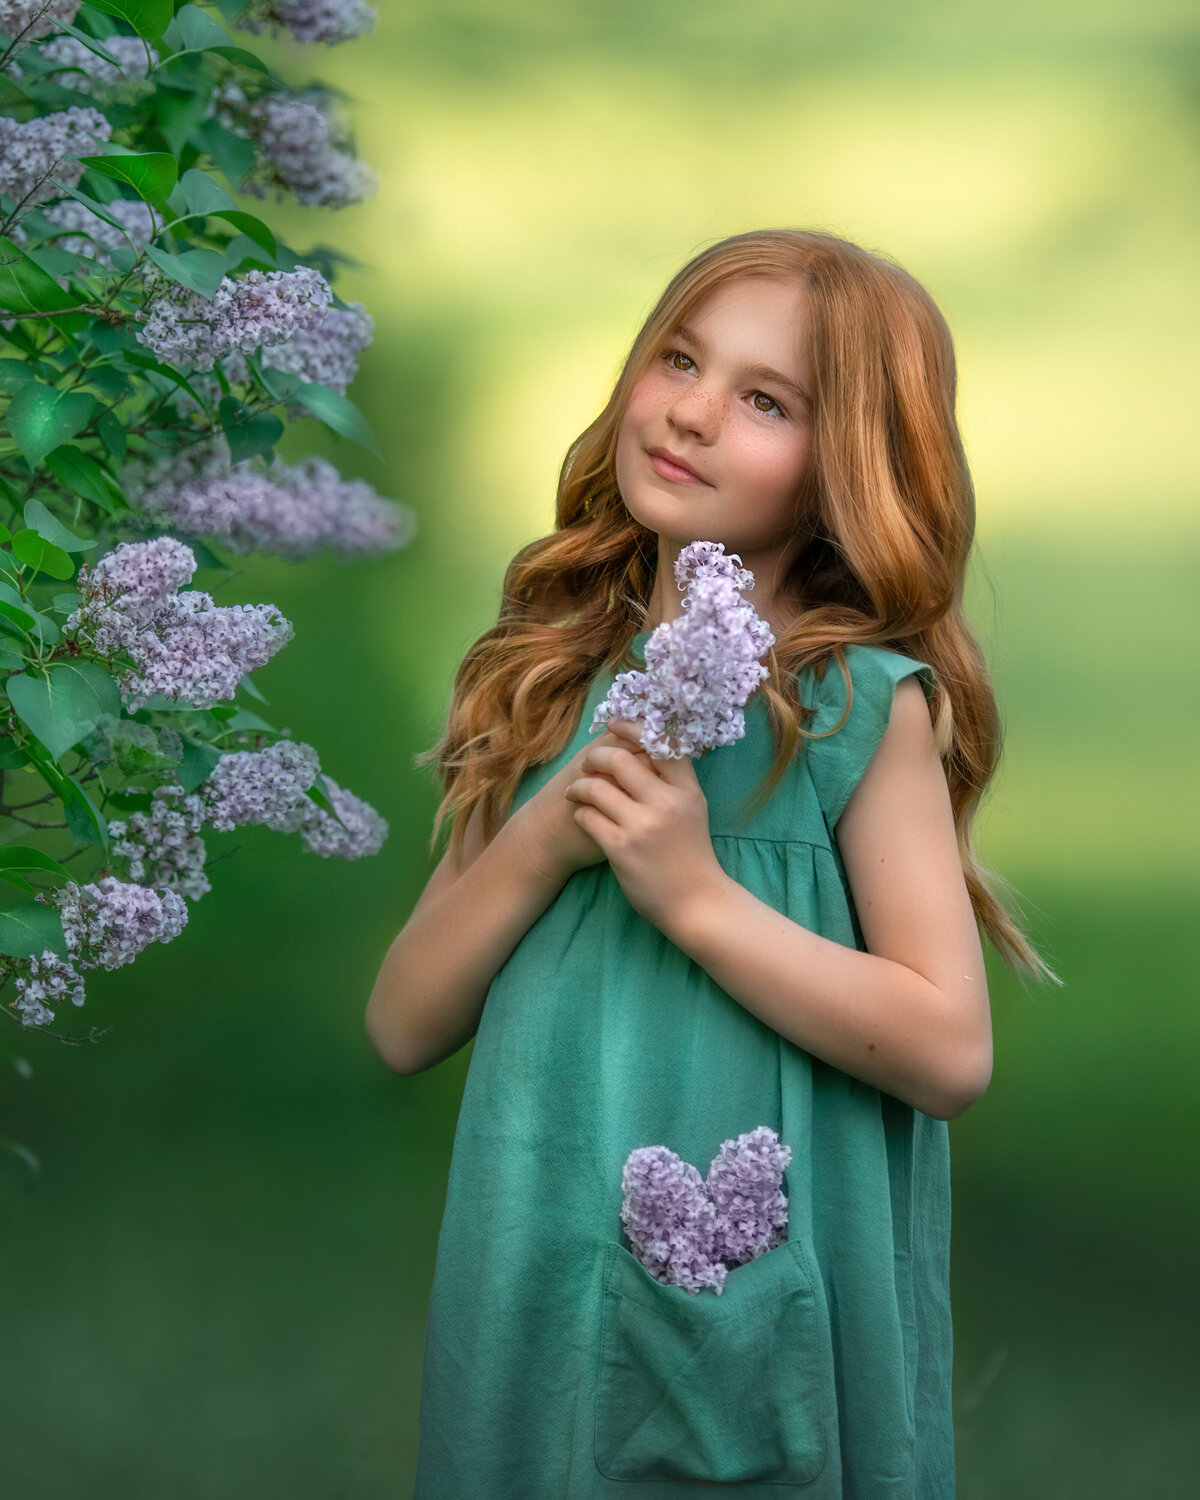 redhead in mint color dress from Target holding purple lilac flowers.